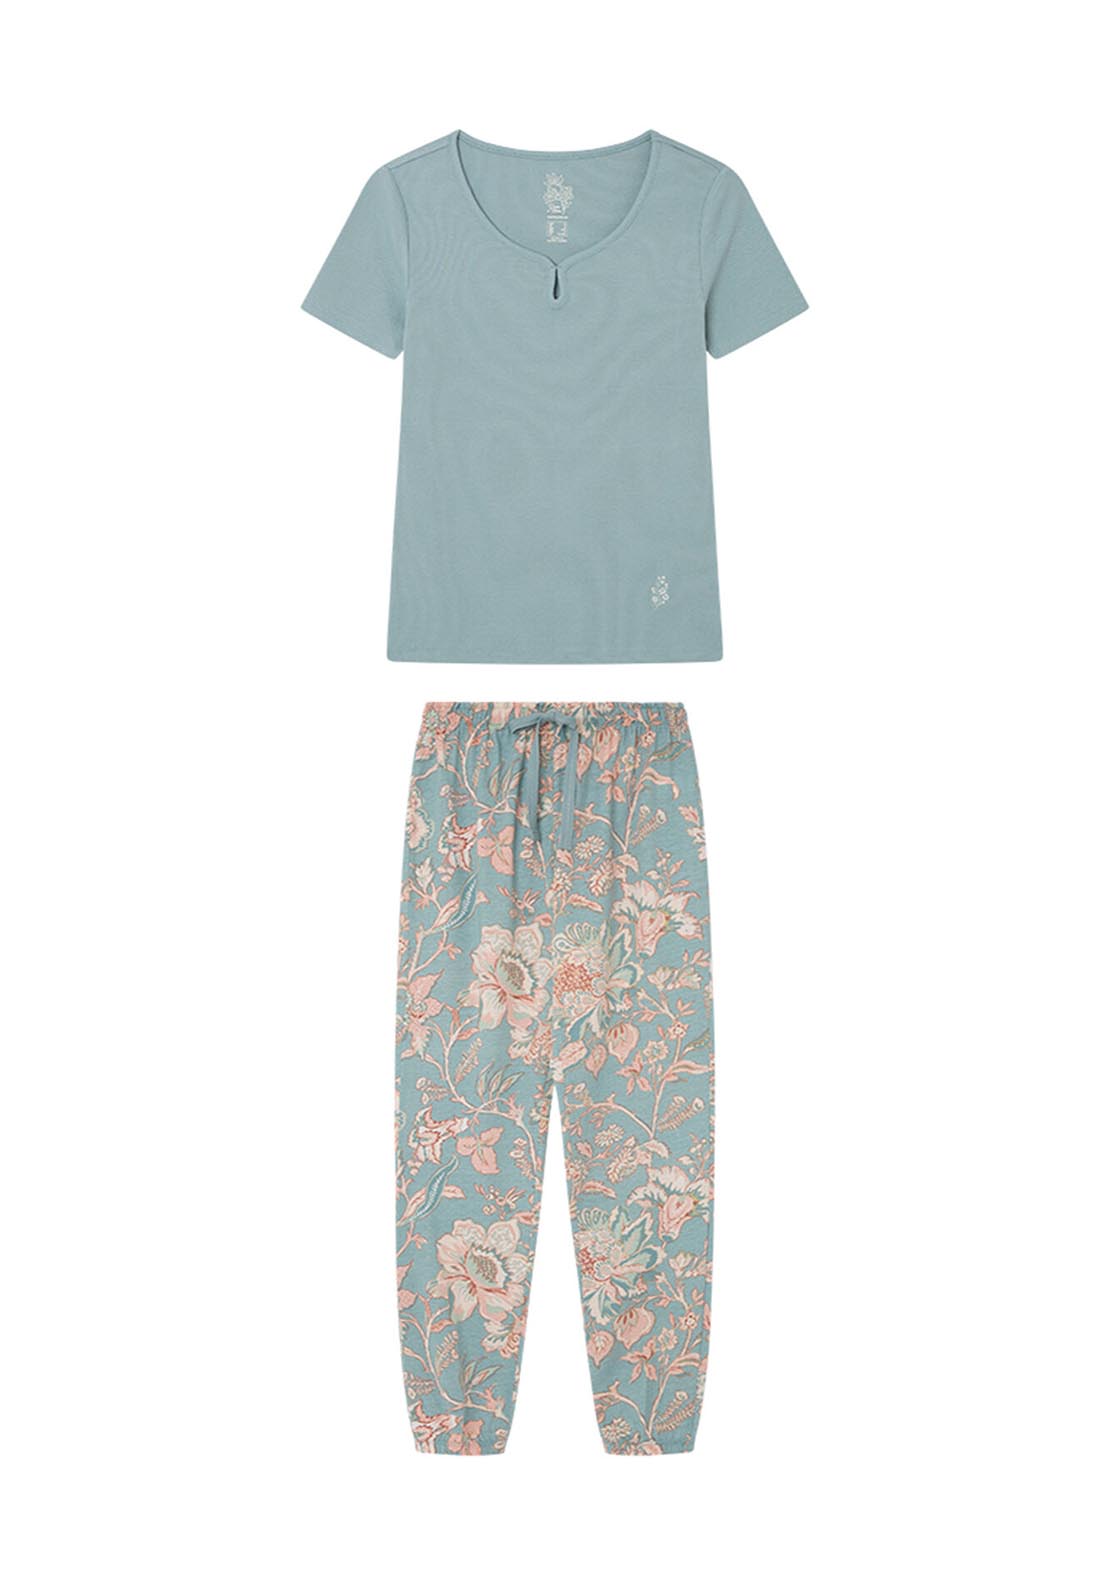 Womens Secret Blue pyjamas in 100% cotton with floral print bottoms - Blue 6 Shaws Department Stores